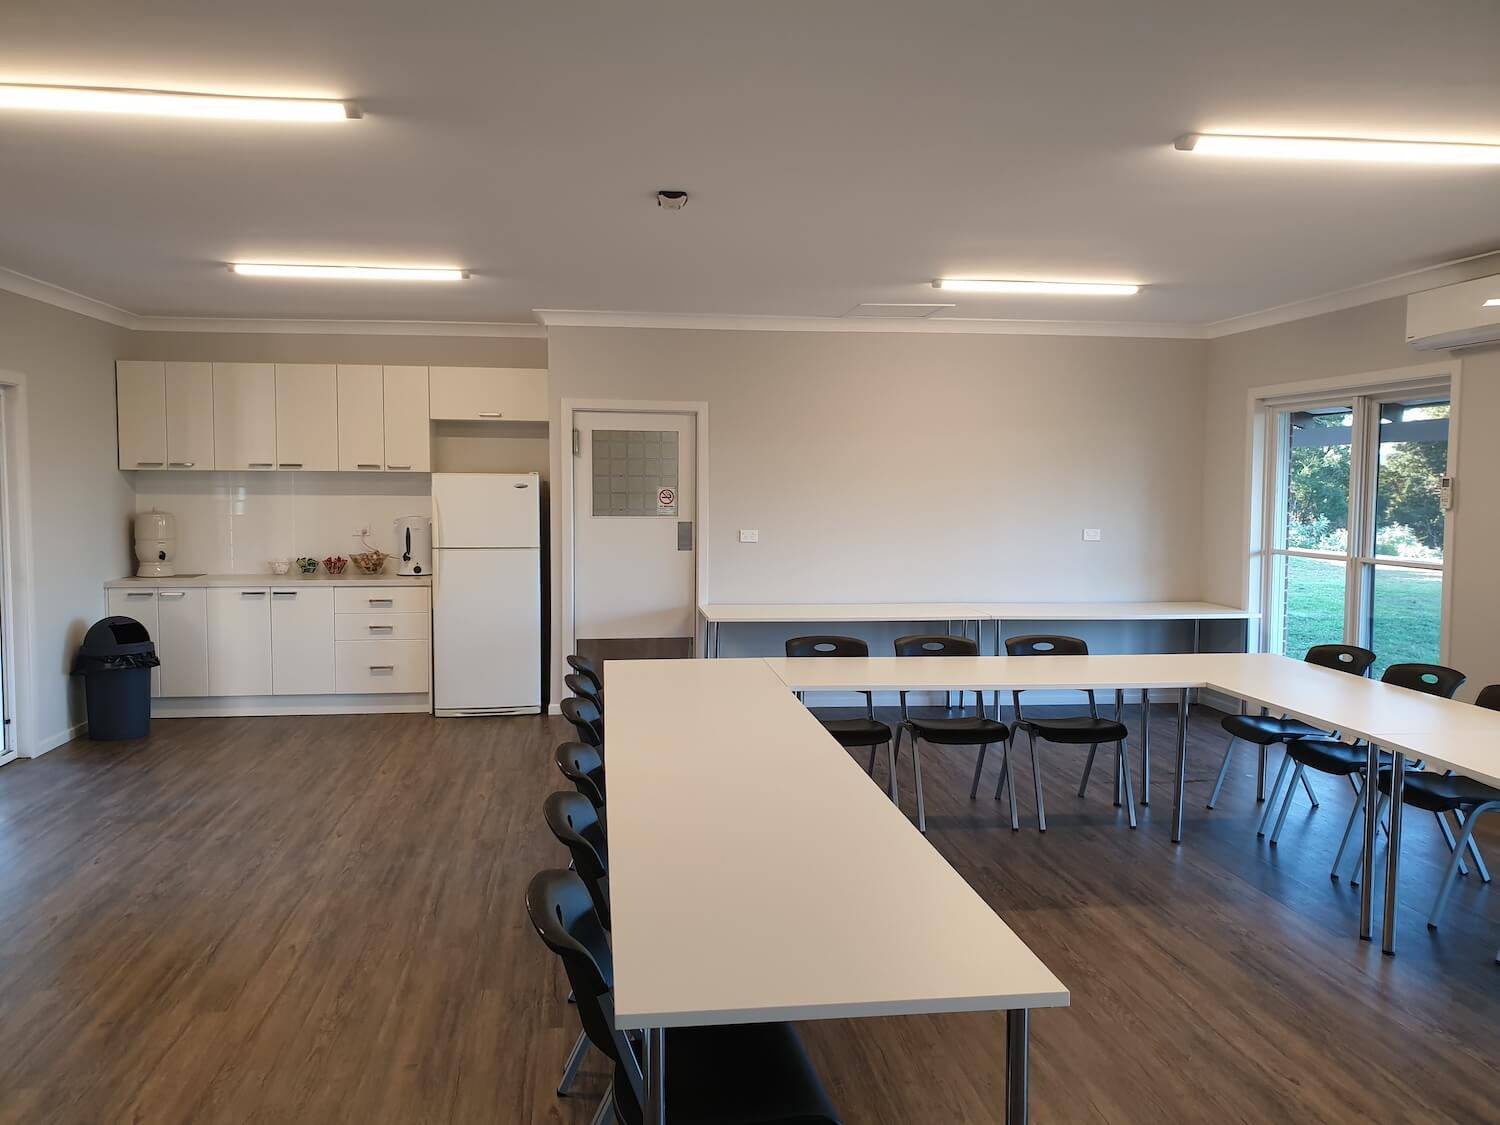 Photo of Lookout Mountain Retreat Conference room from front side looking at kitchen